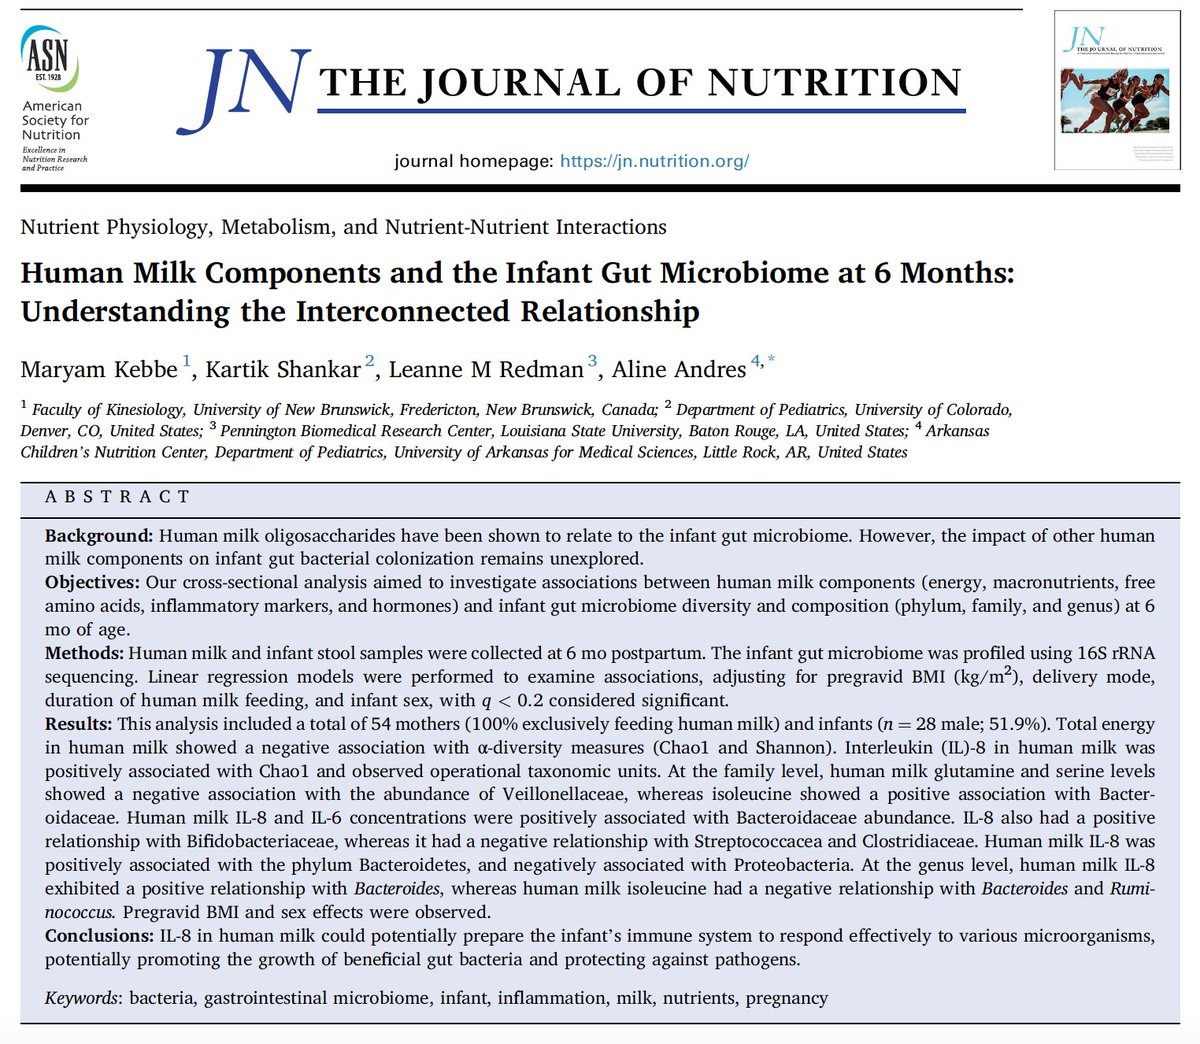 Happy to share our most recent paper: the act of breastfeeding affects the infant gut microbiome, but what about the effects of individual components in breastmilk? 🤱🦠@AlineAndres_ @kshankar110 @DrLeanneRedman @Els_Nutrition @nutritionorg authors.elsevier.com/c/1ipiS54l~SZY8